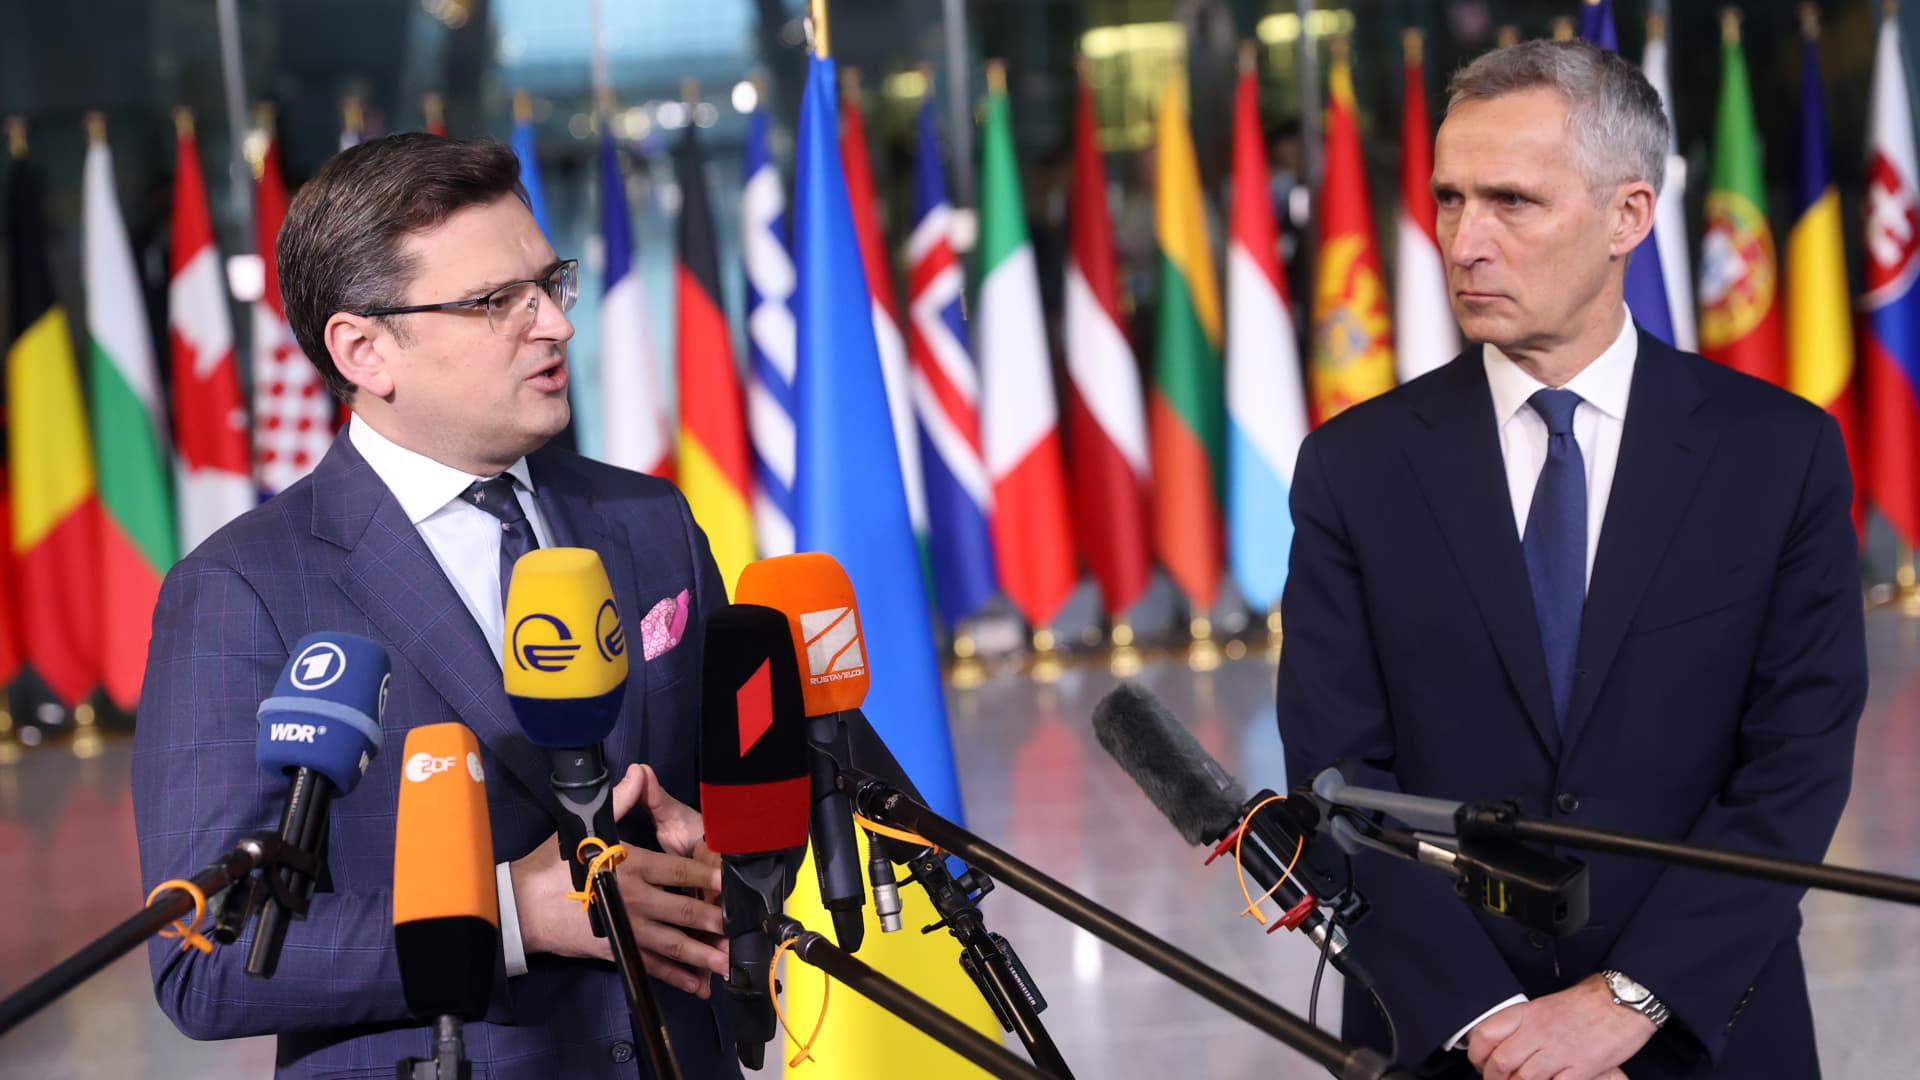 Ukraine's Foreign Minister Dmytro Kuleba (L) and NATO Secretary General Jens Stoltenberg give a press conference before a meeting of NATO foreign ministers at NATO headquarters, in Brussels, on April 7, 2022.